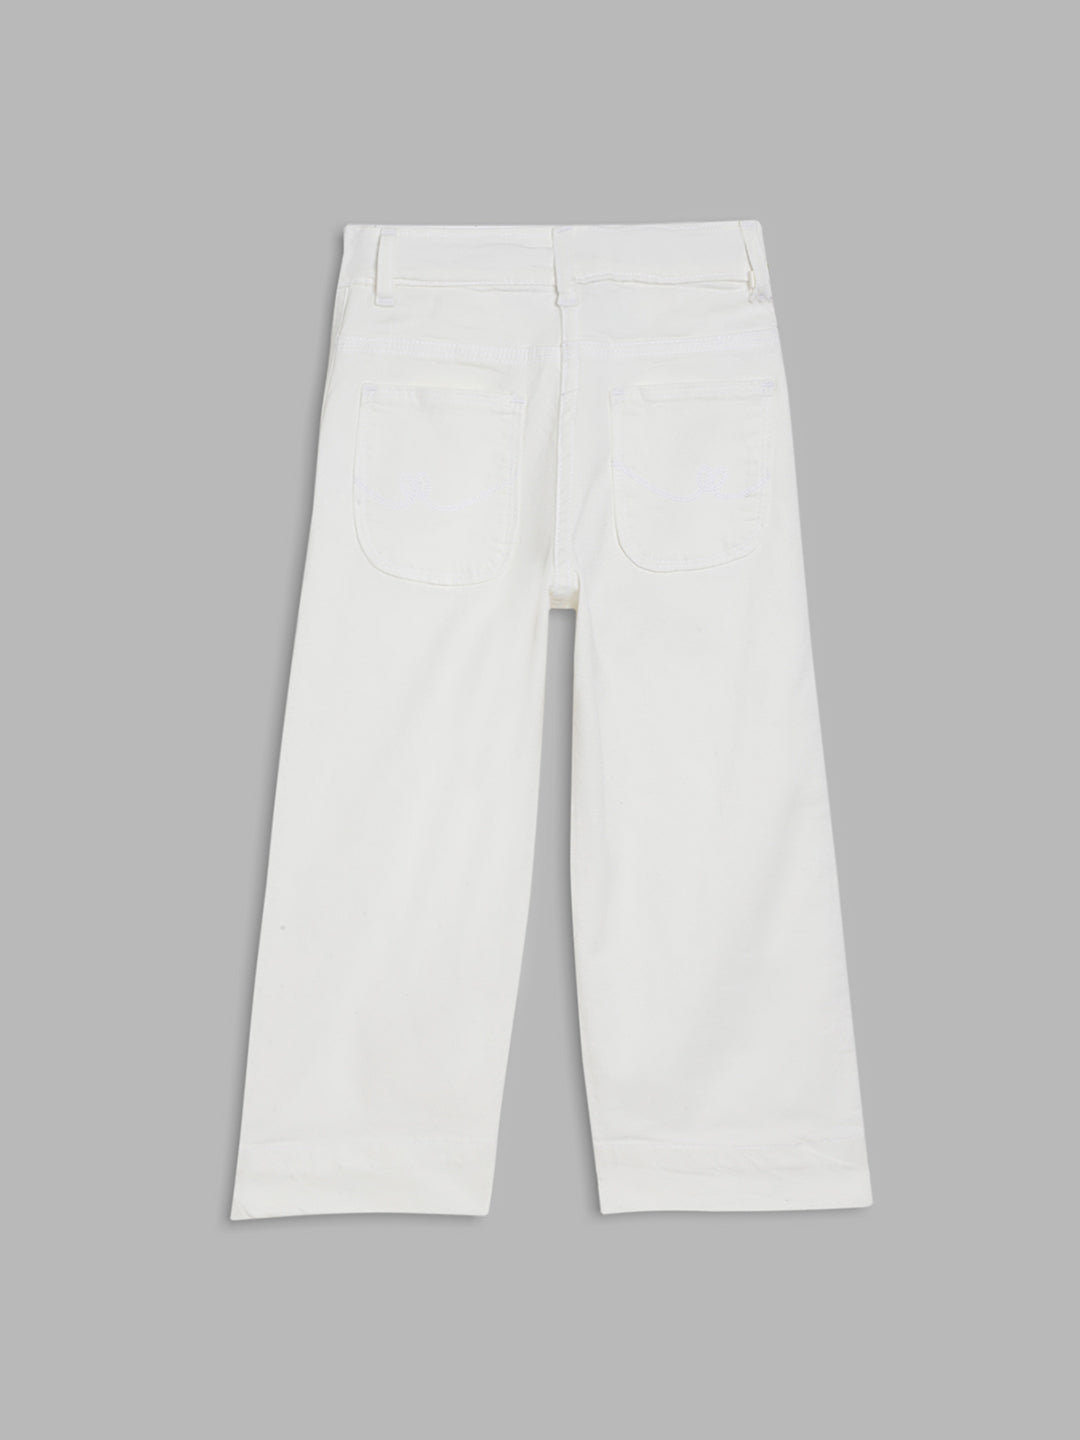 Elle Kids Girls White Solid Relaxed Fit Jeans